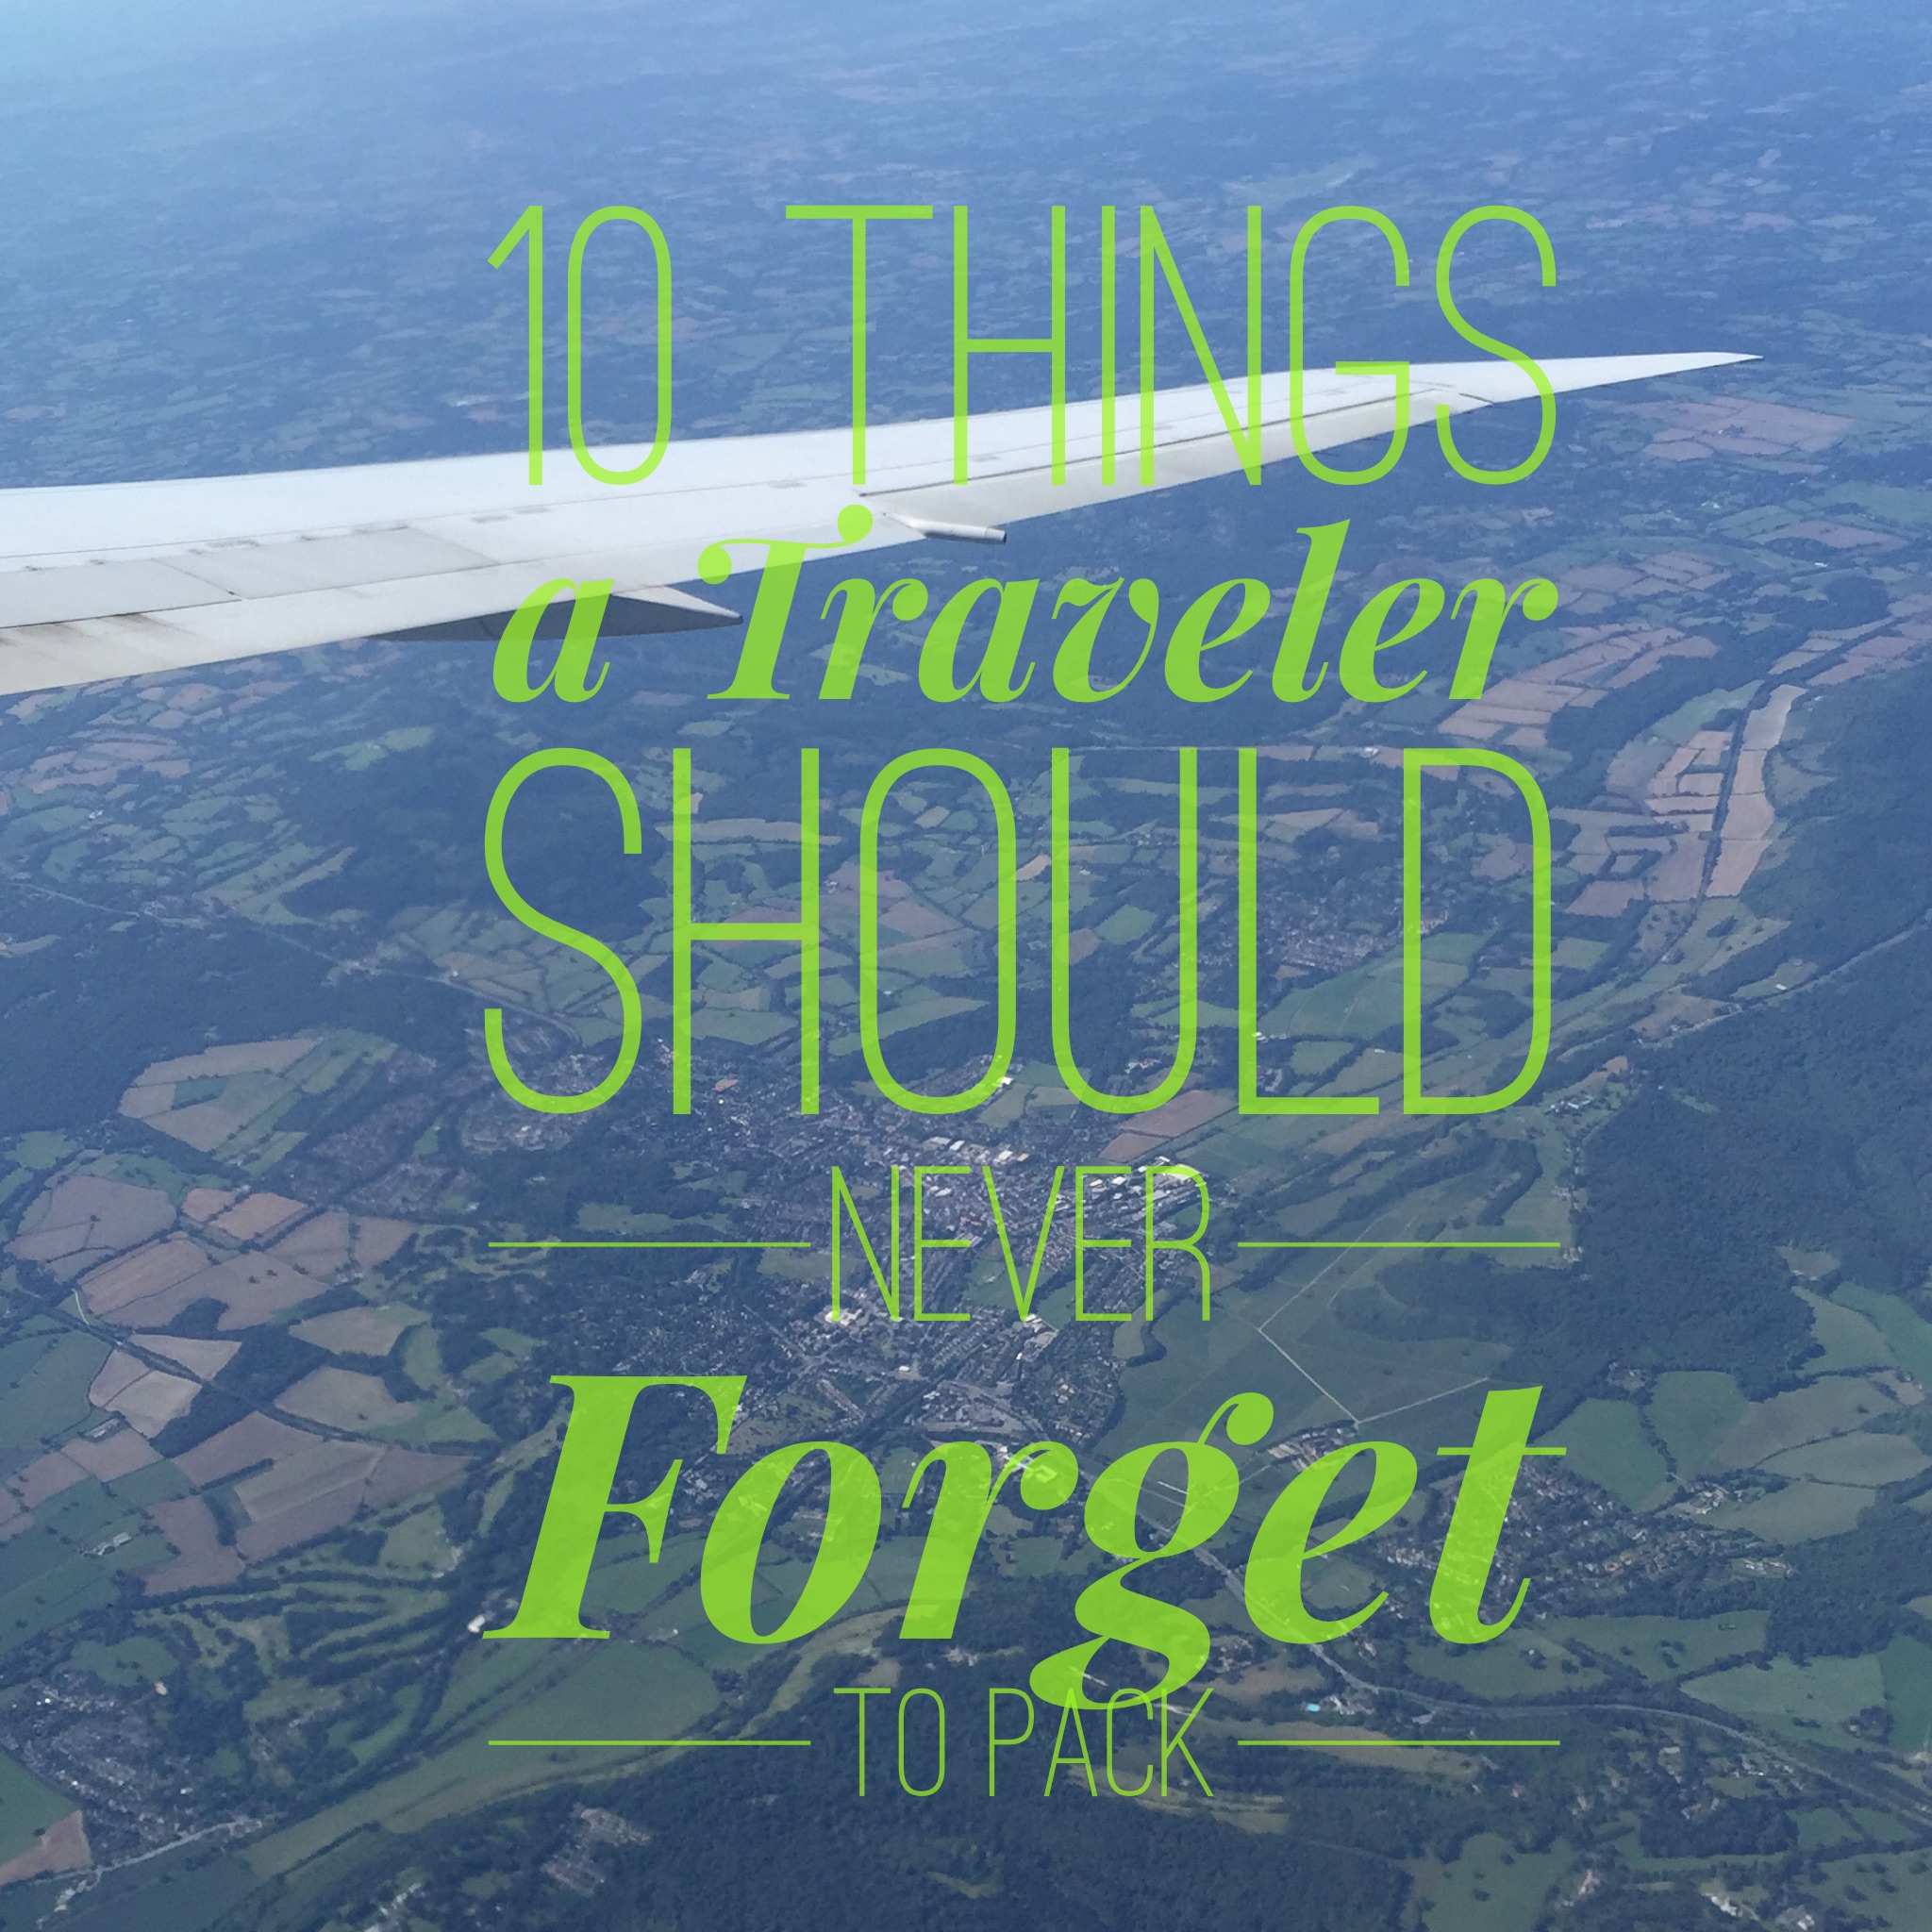 10 Things a Traveler Should Never Forget to Pack